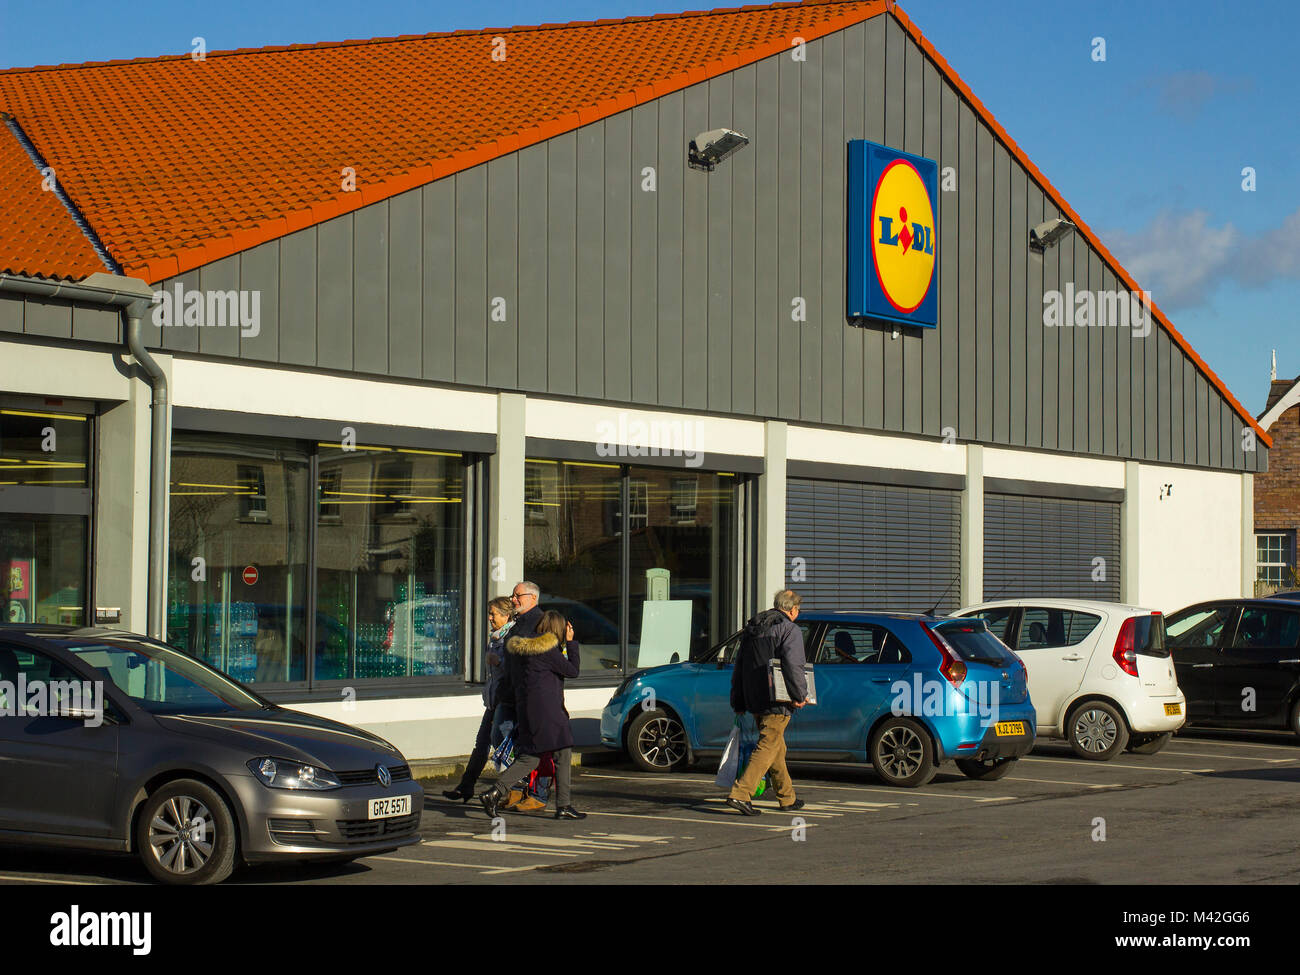 The car park and signage of the Lidl  Supermarket on the Circular road in Bangor County Down on a bright midwinter day Stock Photo